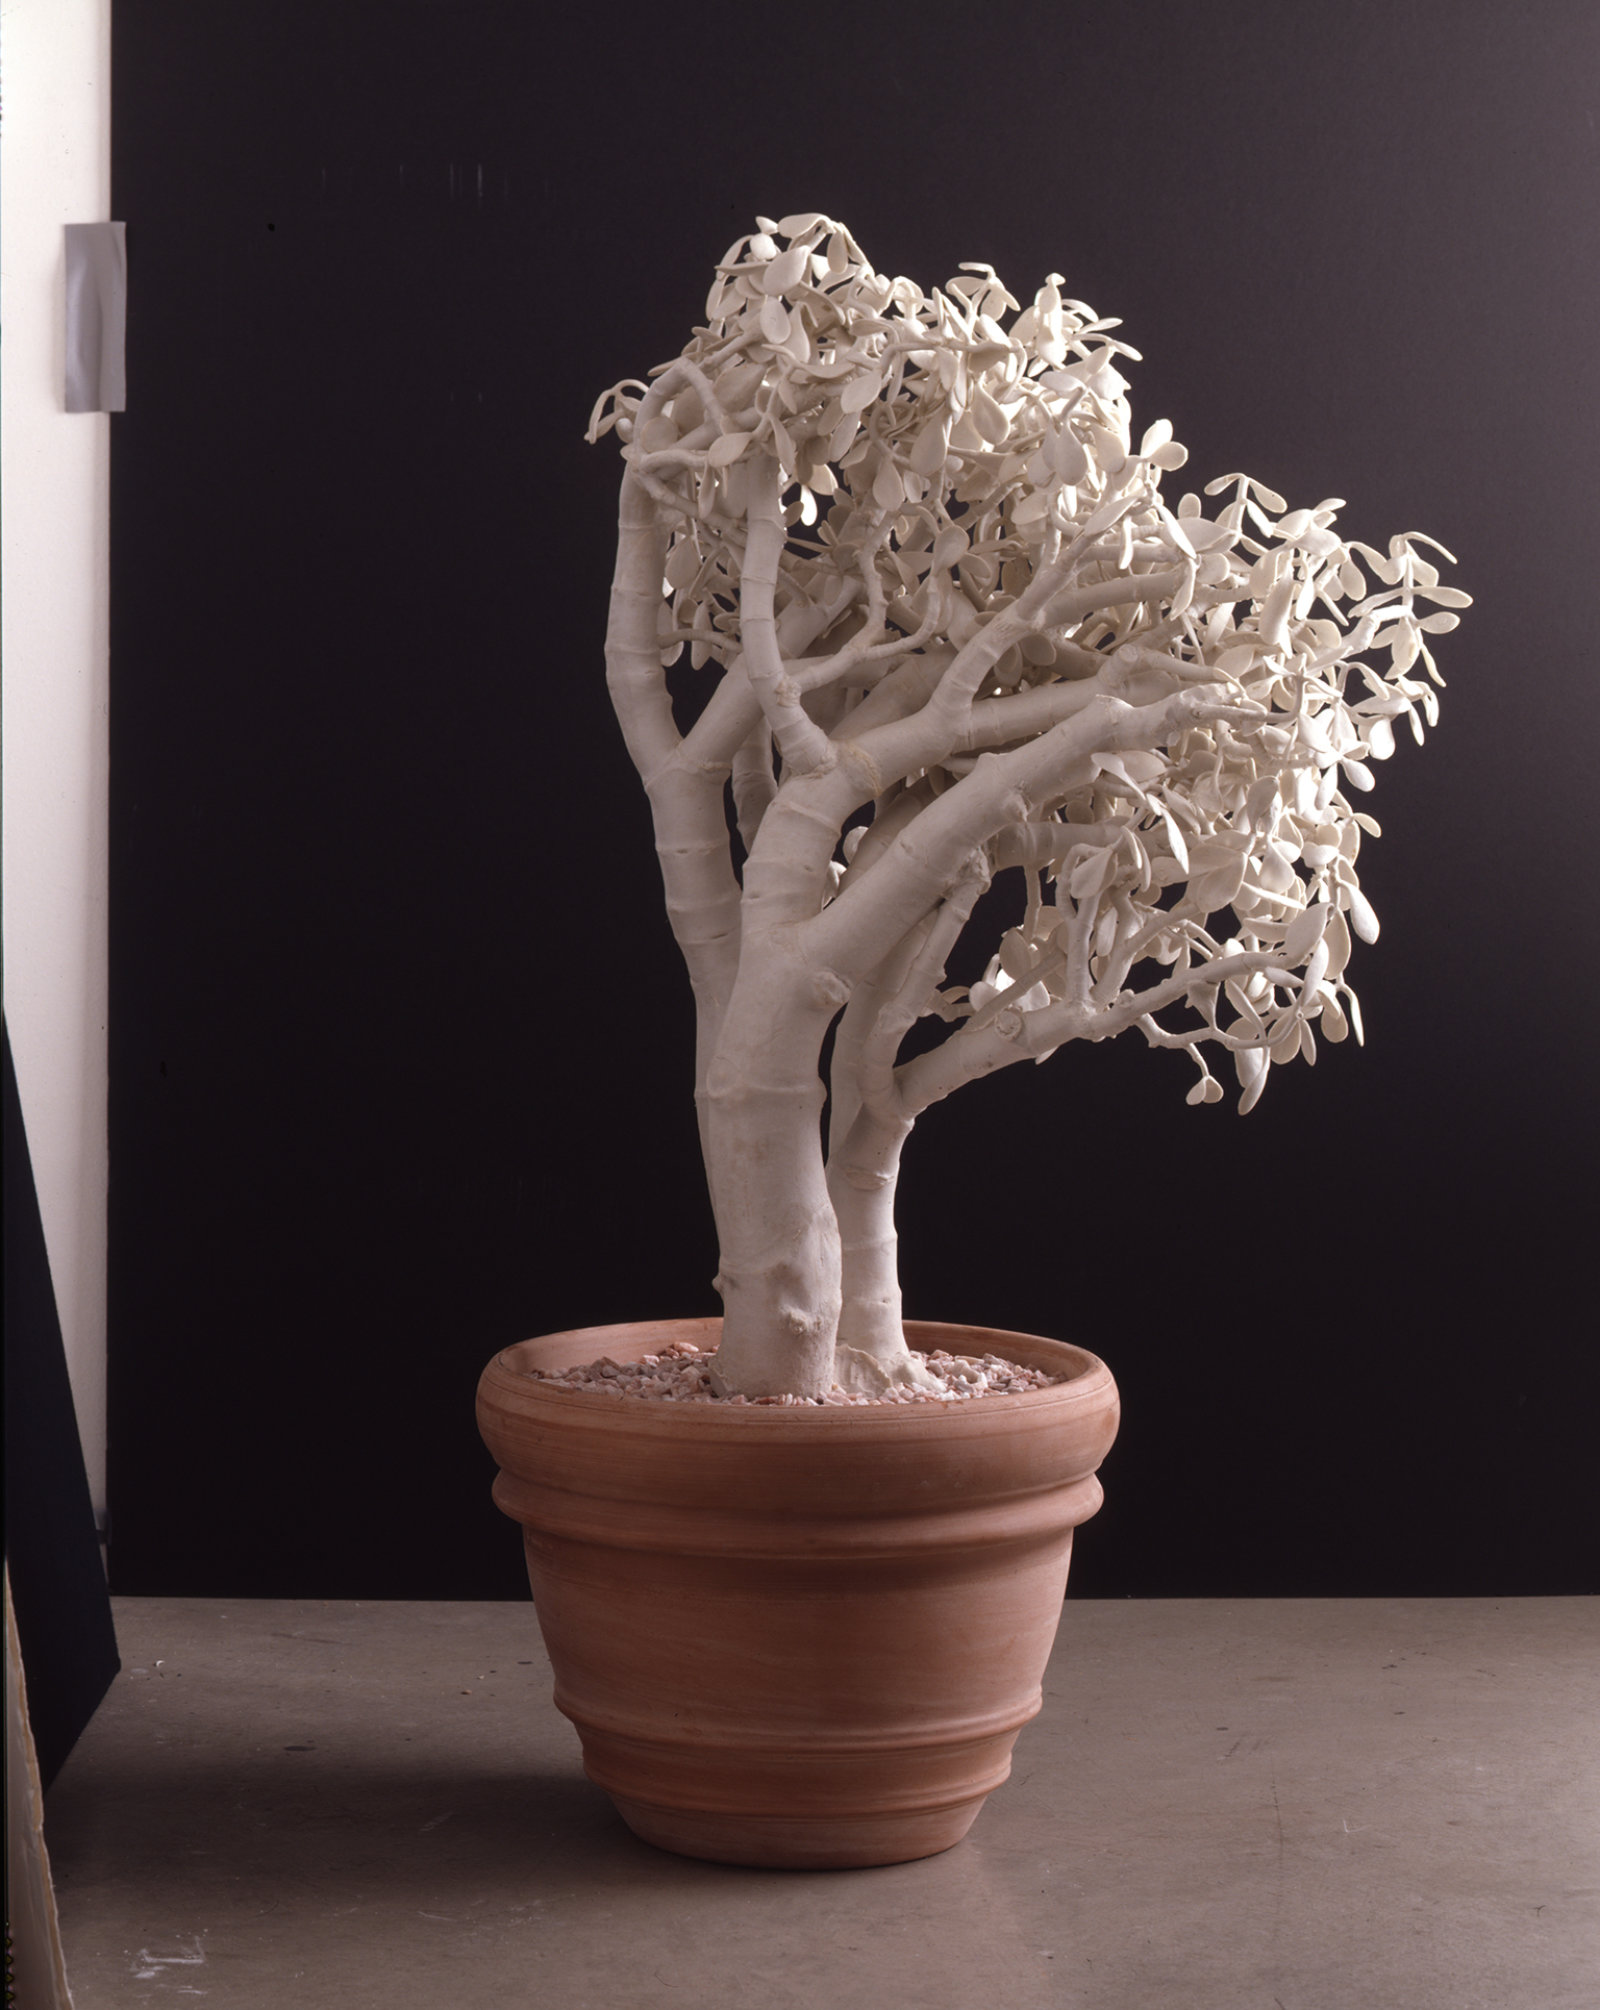 Liz Magor, House Plant, 1993, clay, fluorescent light, silicone rubber, dimensions variable